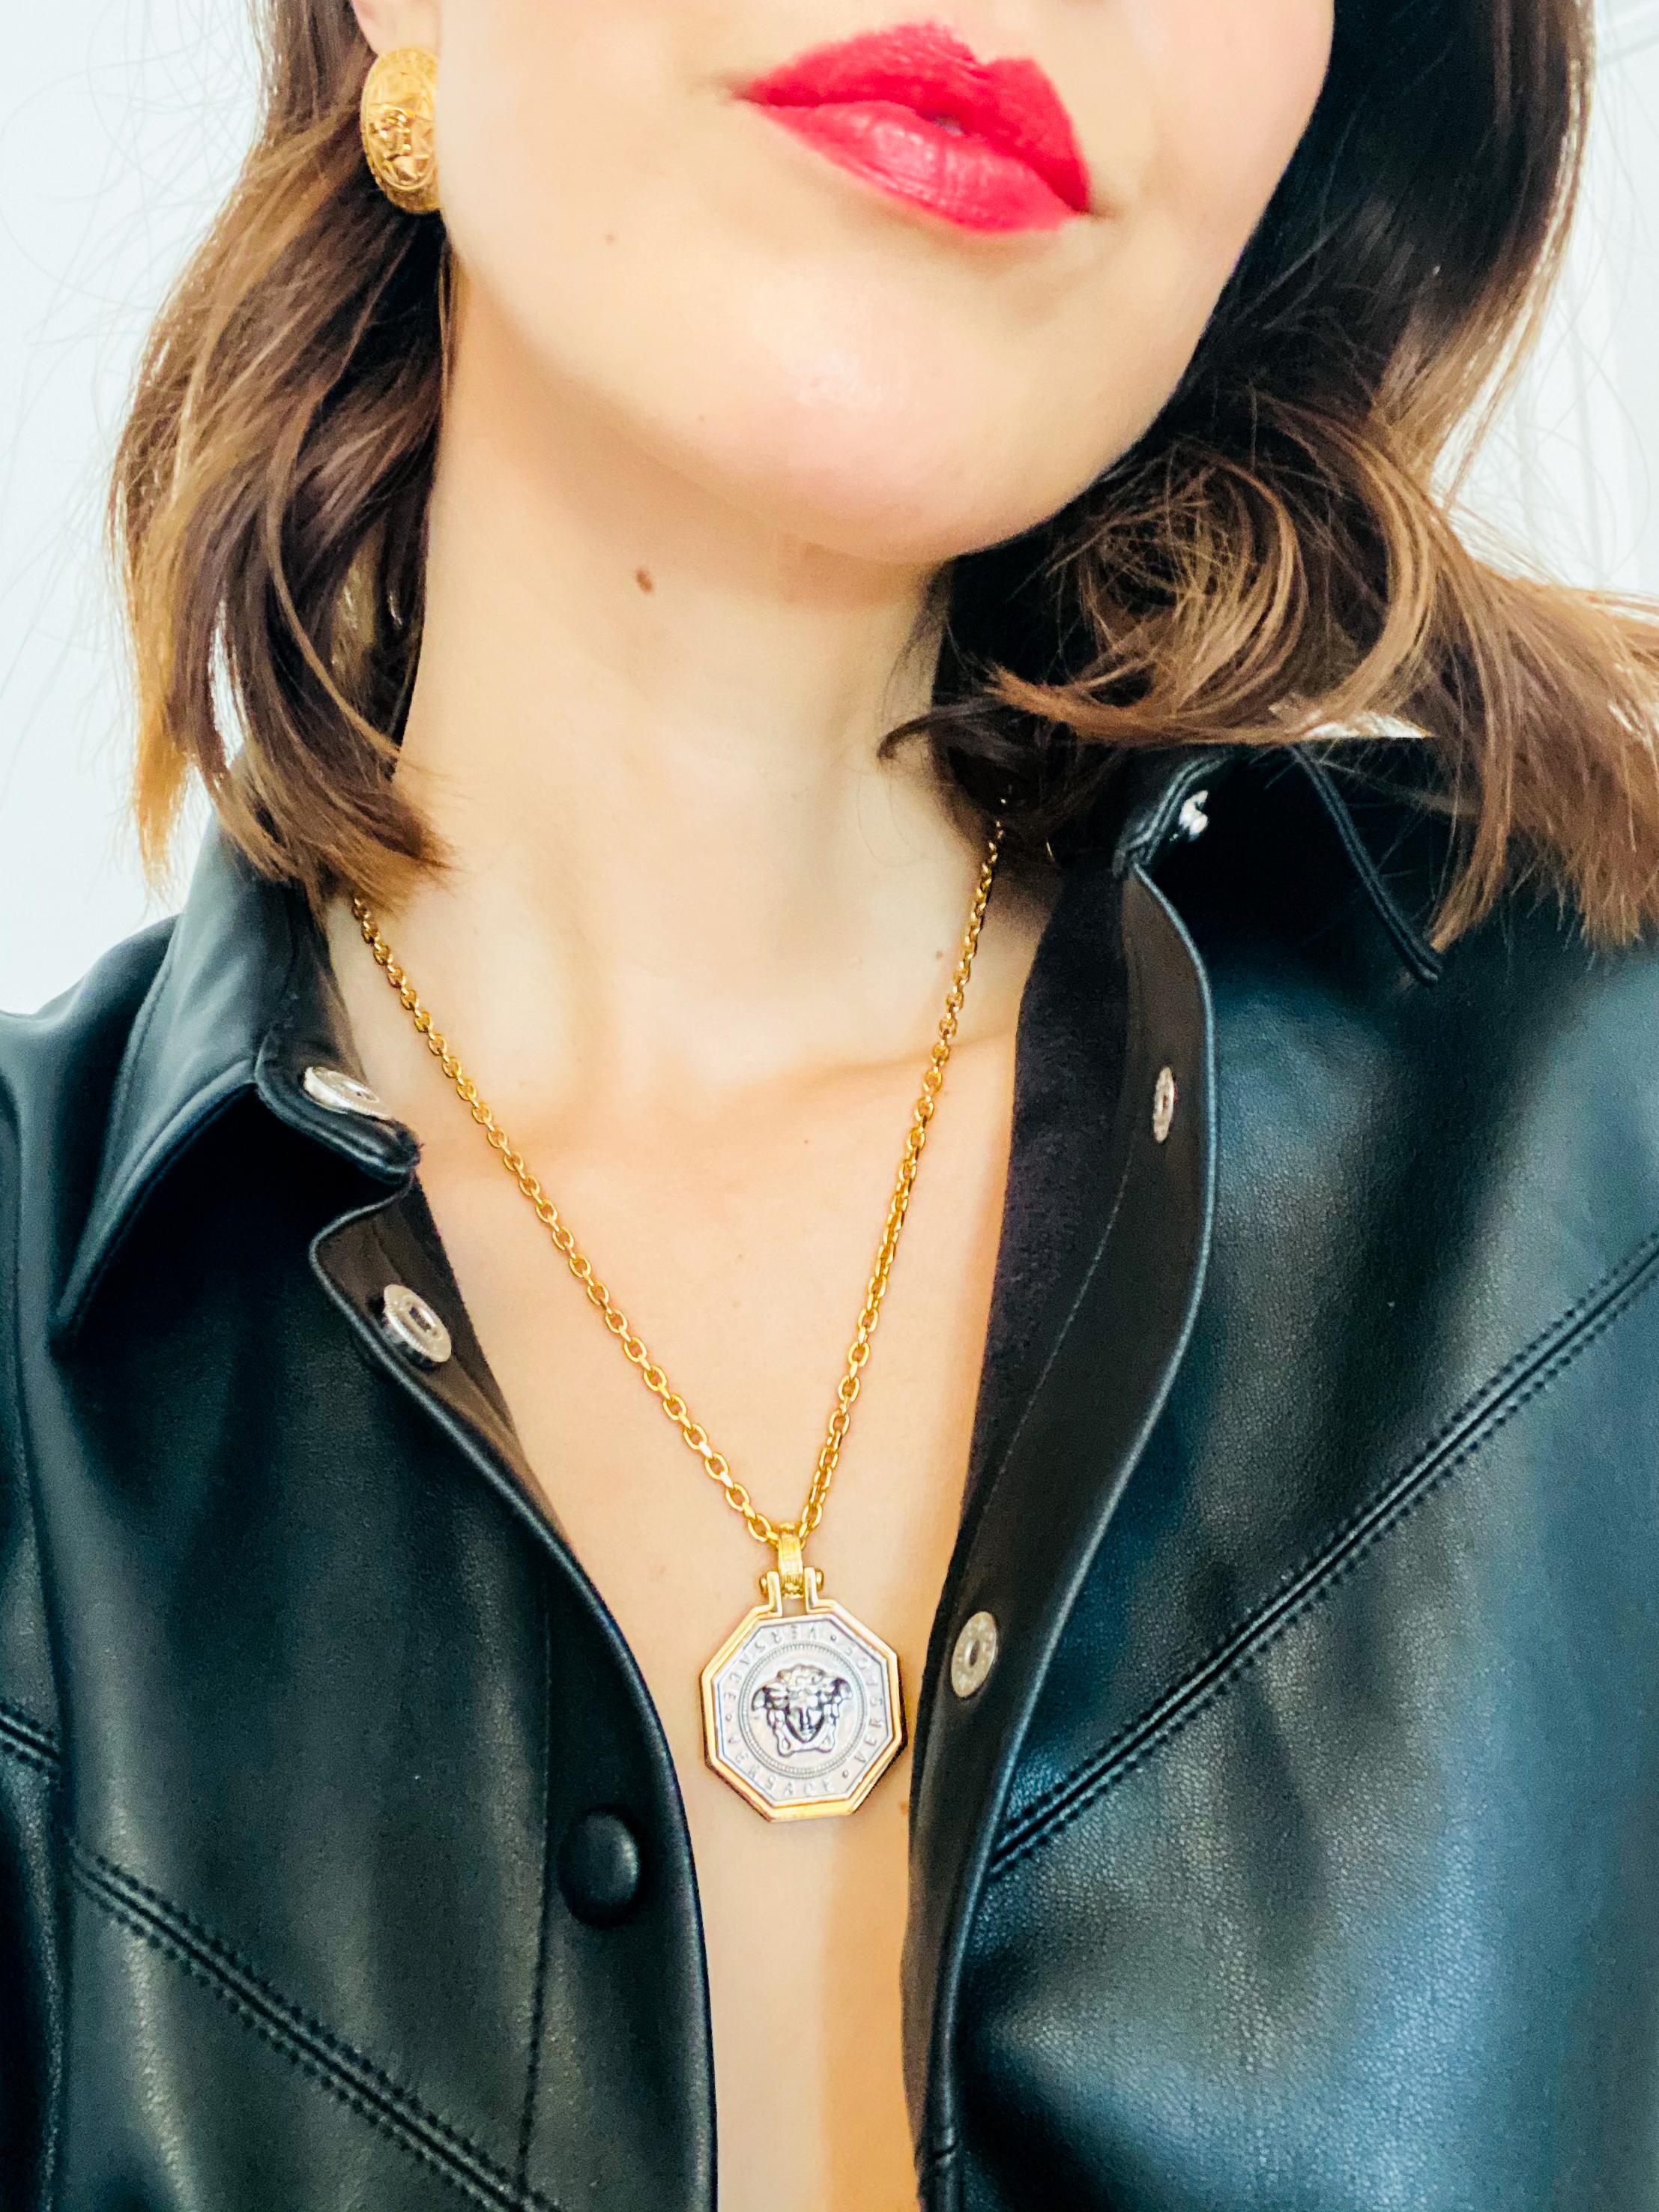 Versace Vintage Y2K Medusa Necklace

Incredible statement medusa necklace from the iconic Versace

Detail
-Made in Italy
-Crafted from gold and silver plated metal
-Featuring iconic Medusa Head embossed on an Greco-inspired octogon shaped pendant